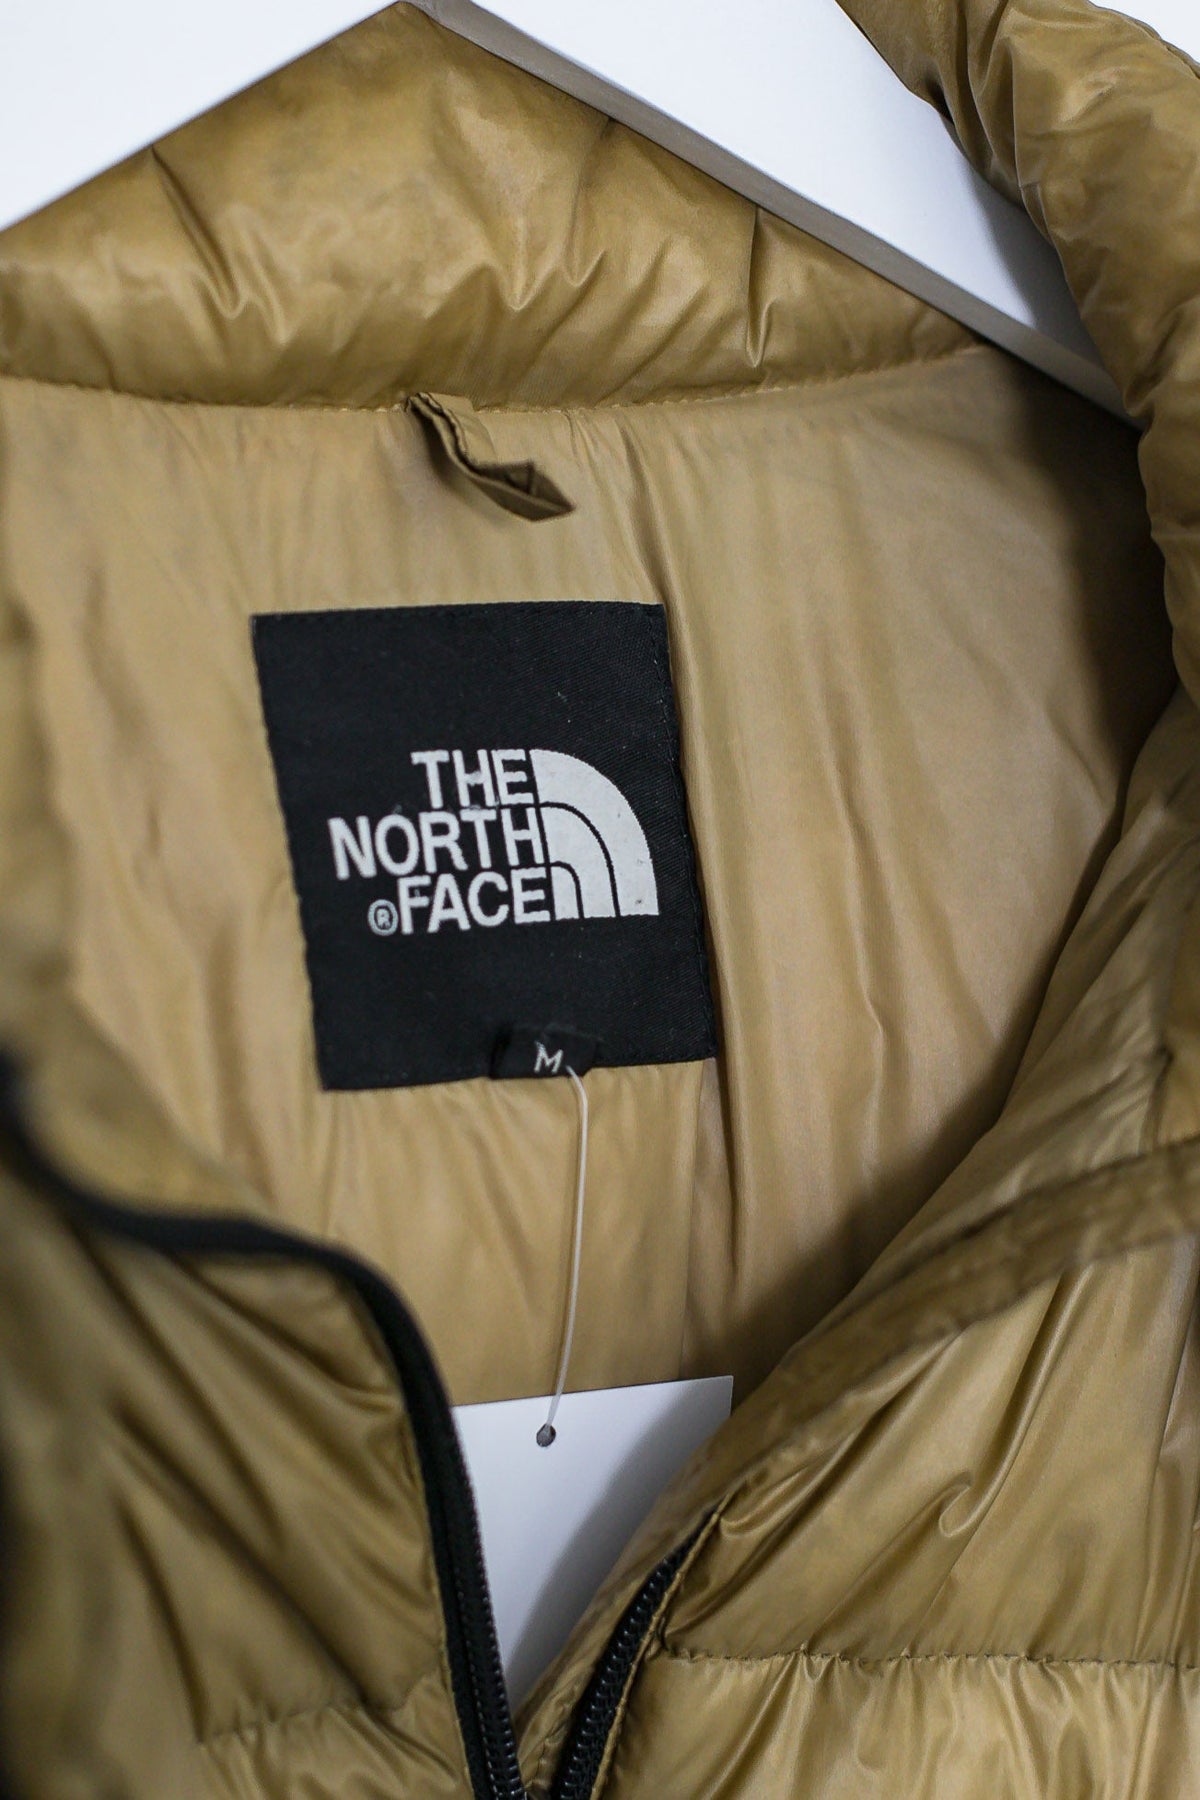 The North Face 700 Fill Puffer Jacket (M)